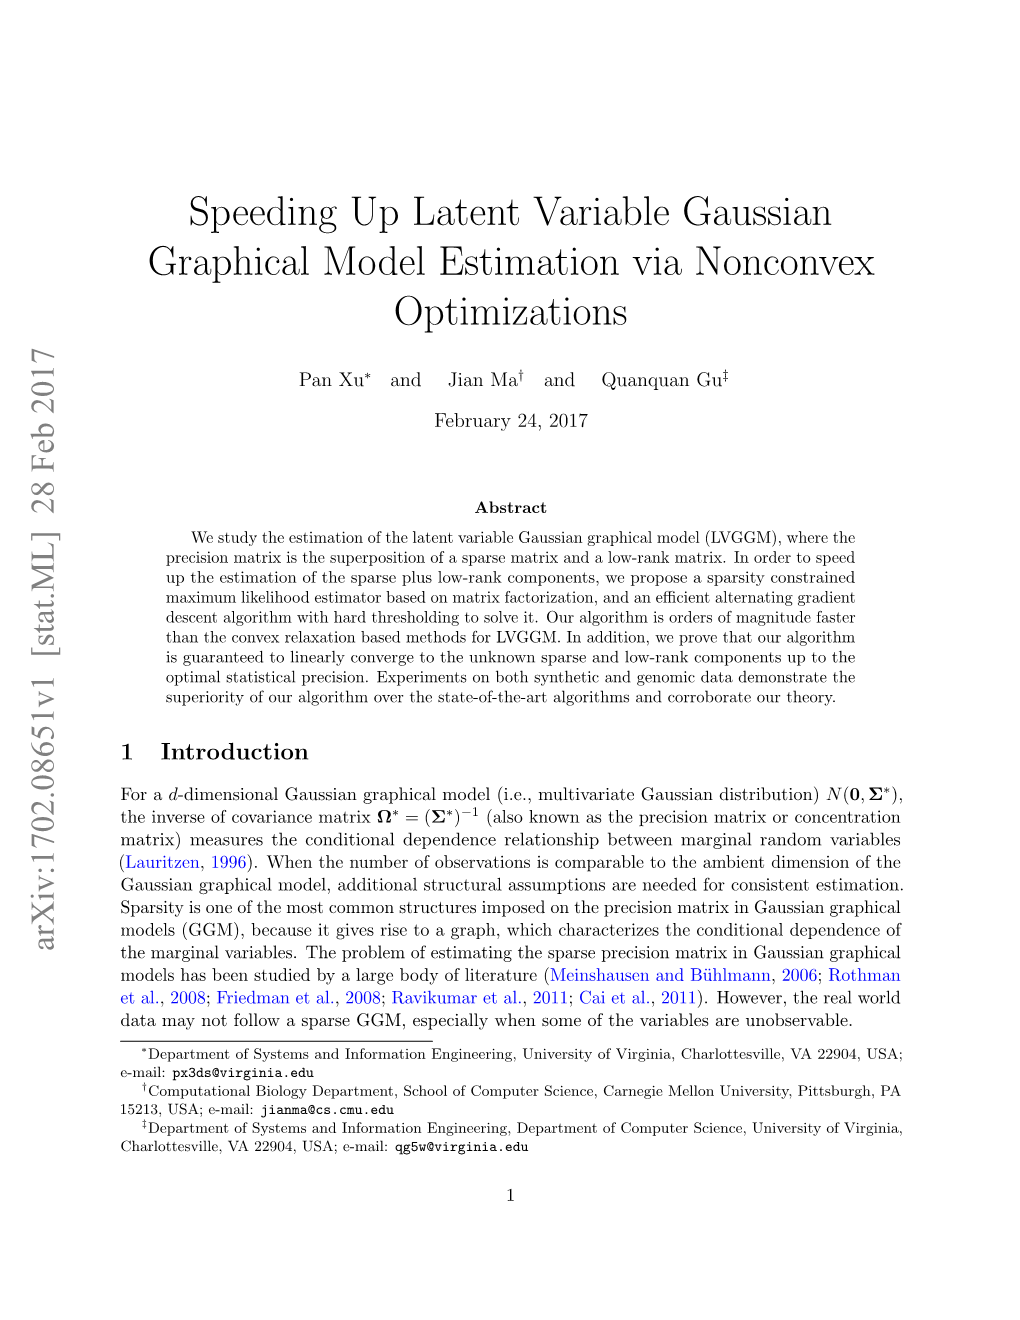 Speeding up Latent Variable Gaussian Graphical Model Estimation Via Nonconvex Optimizations